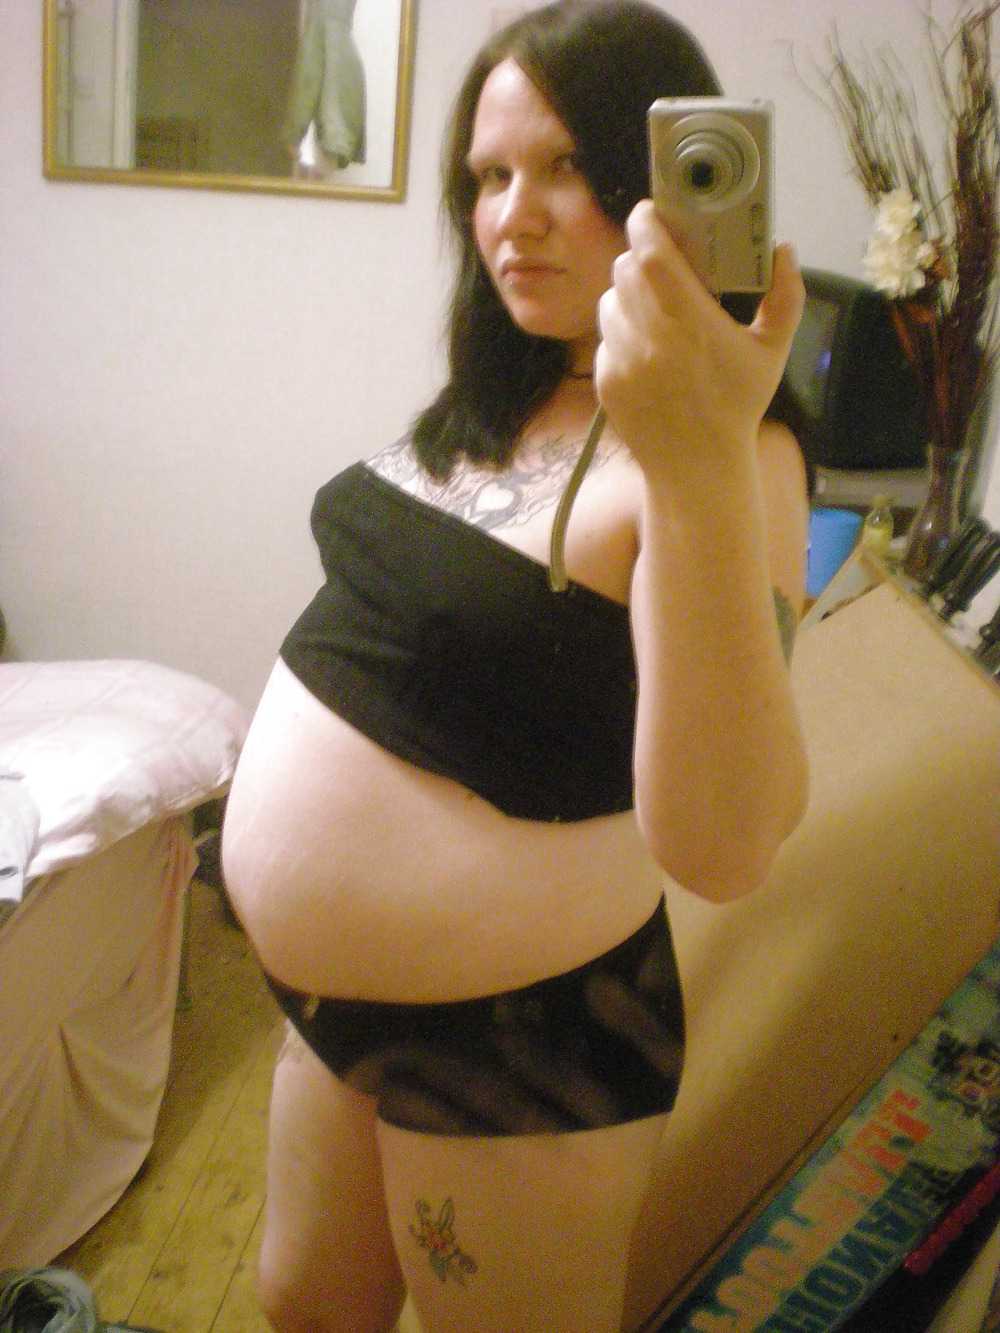 Some Images of  AMATEUR Pregnant Babe #19270823